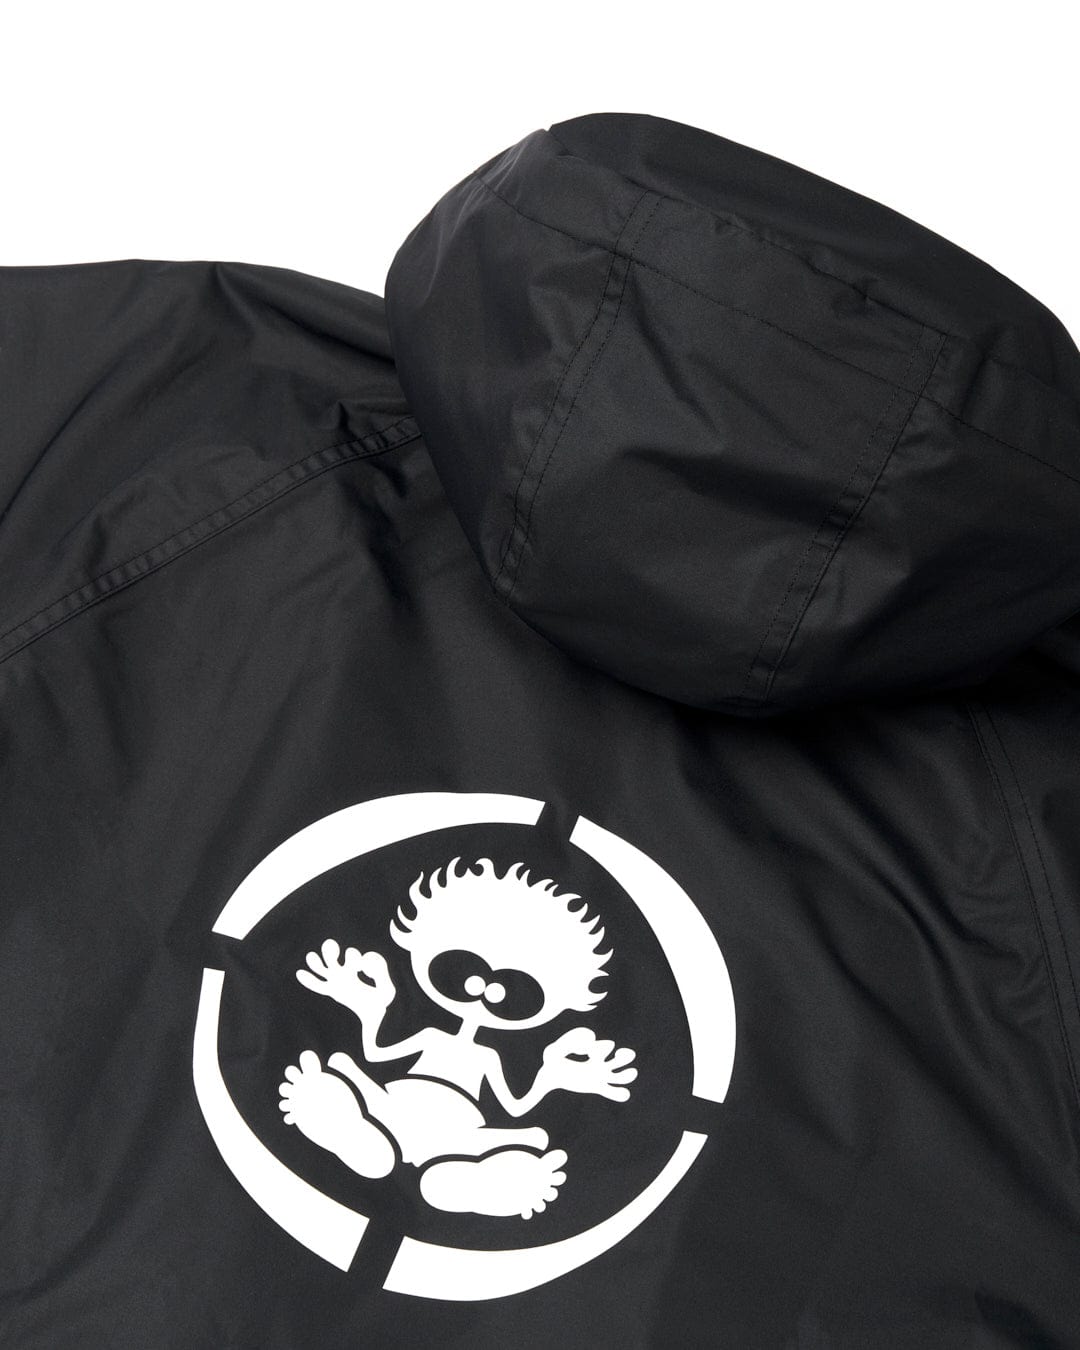 Black jacket made from 3K waterproof ripstop material, featuring a white circular logo with a cartoonish figure on the left chest area, like the Recycled Kids Four Seasons Changing Robe from Saltrock.